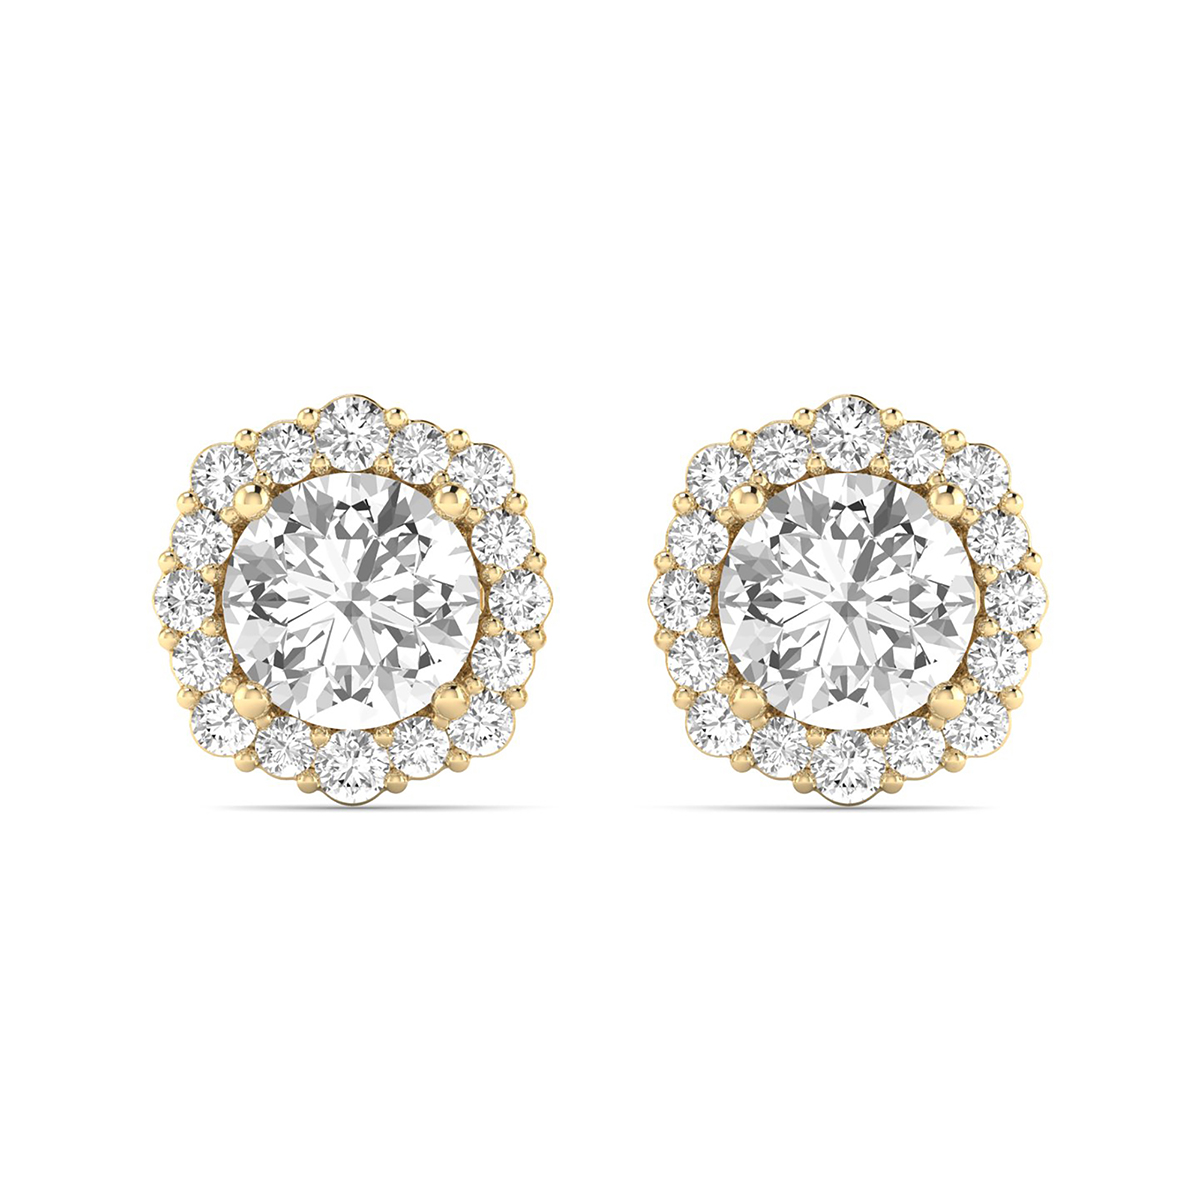 Image of 1 1/5 Carat TW Floral Halo Diamond Stud Earrings 14K Yellow Gold